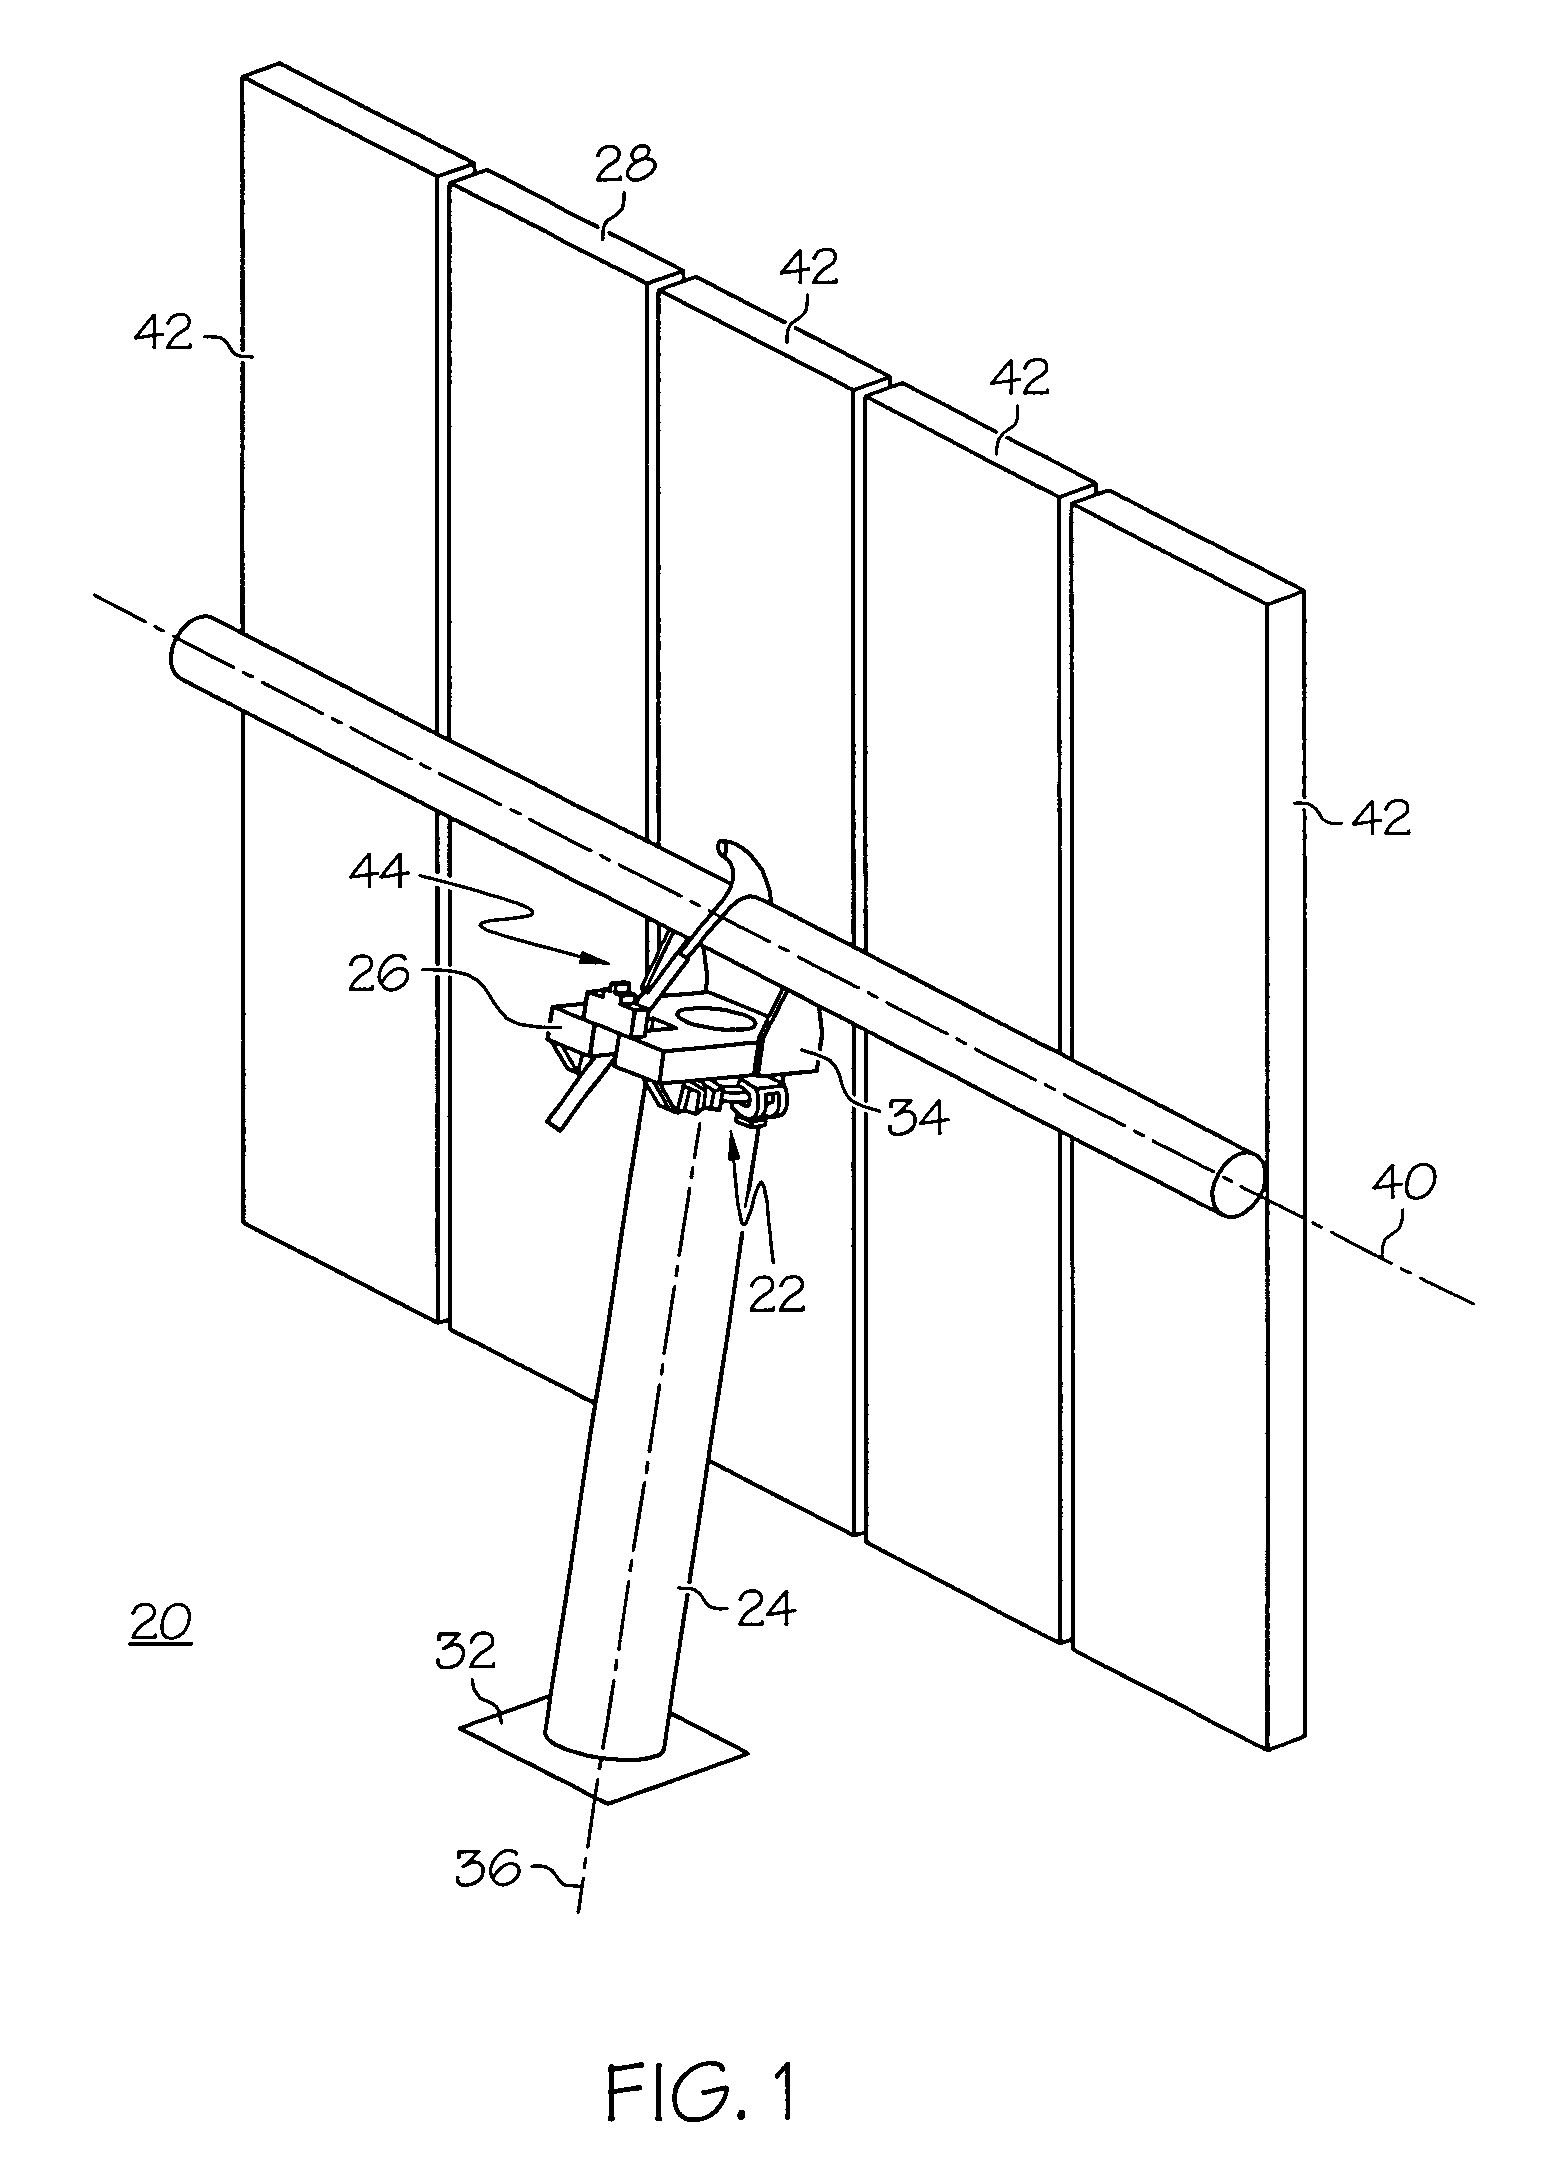 Positioning system and method of orienting an object using same